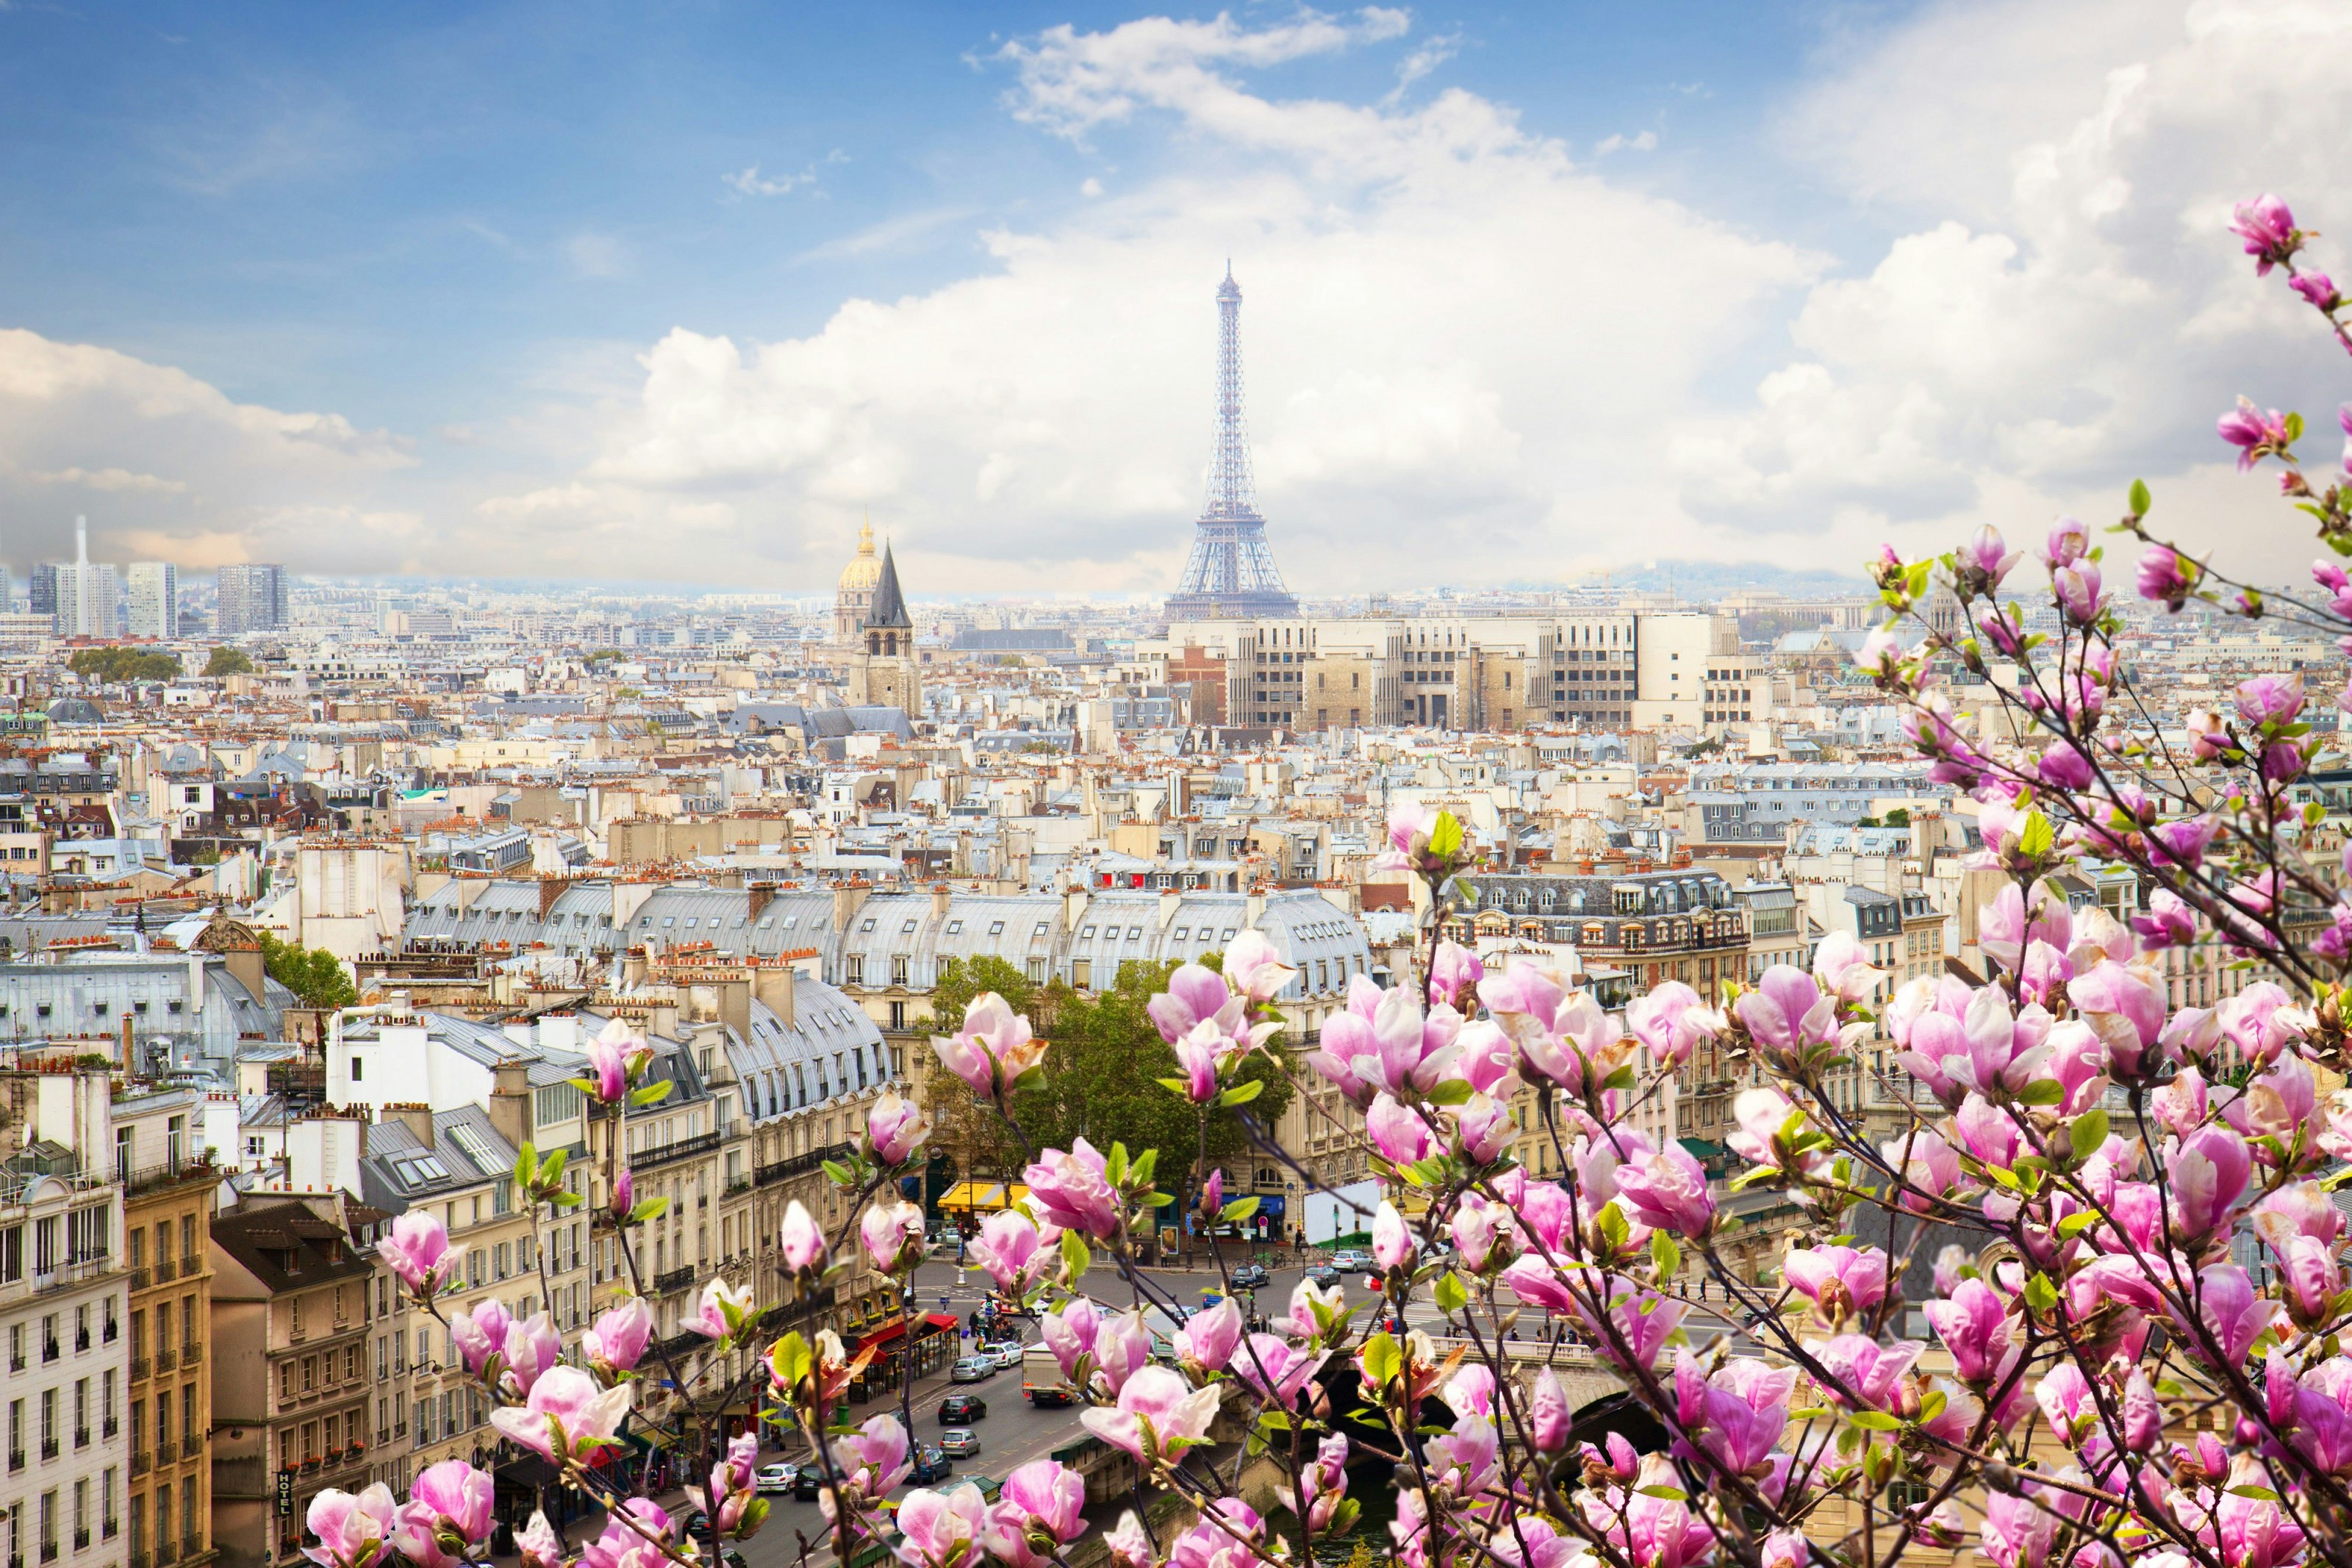 A view of Paris' skyline with the Eiffel Tower prominent in the distance, while a branch of pink tree blossoms dominates the foreground.